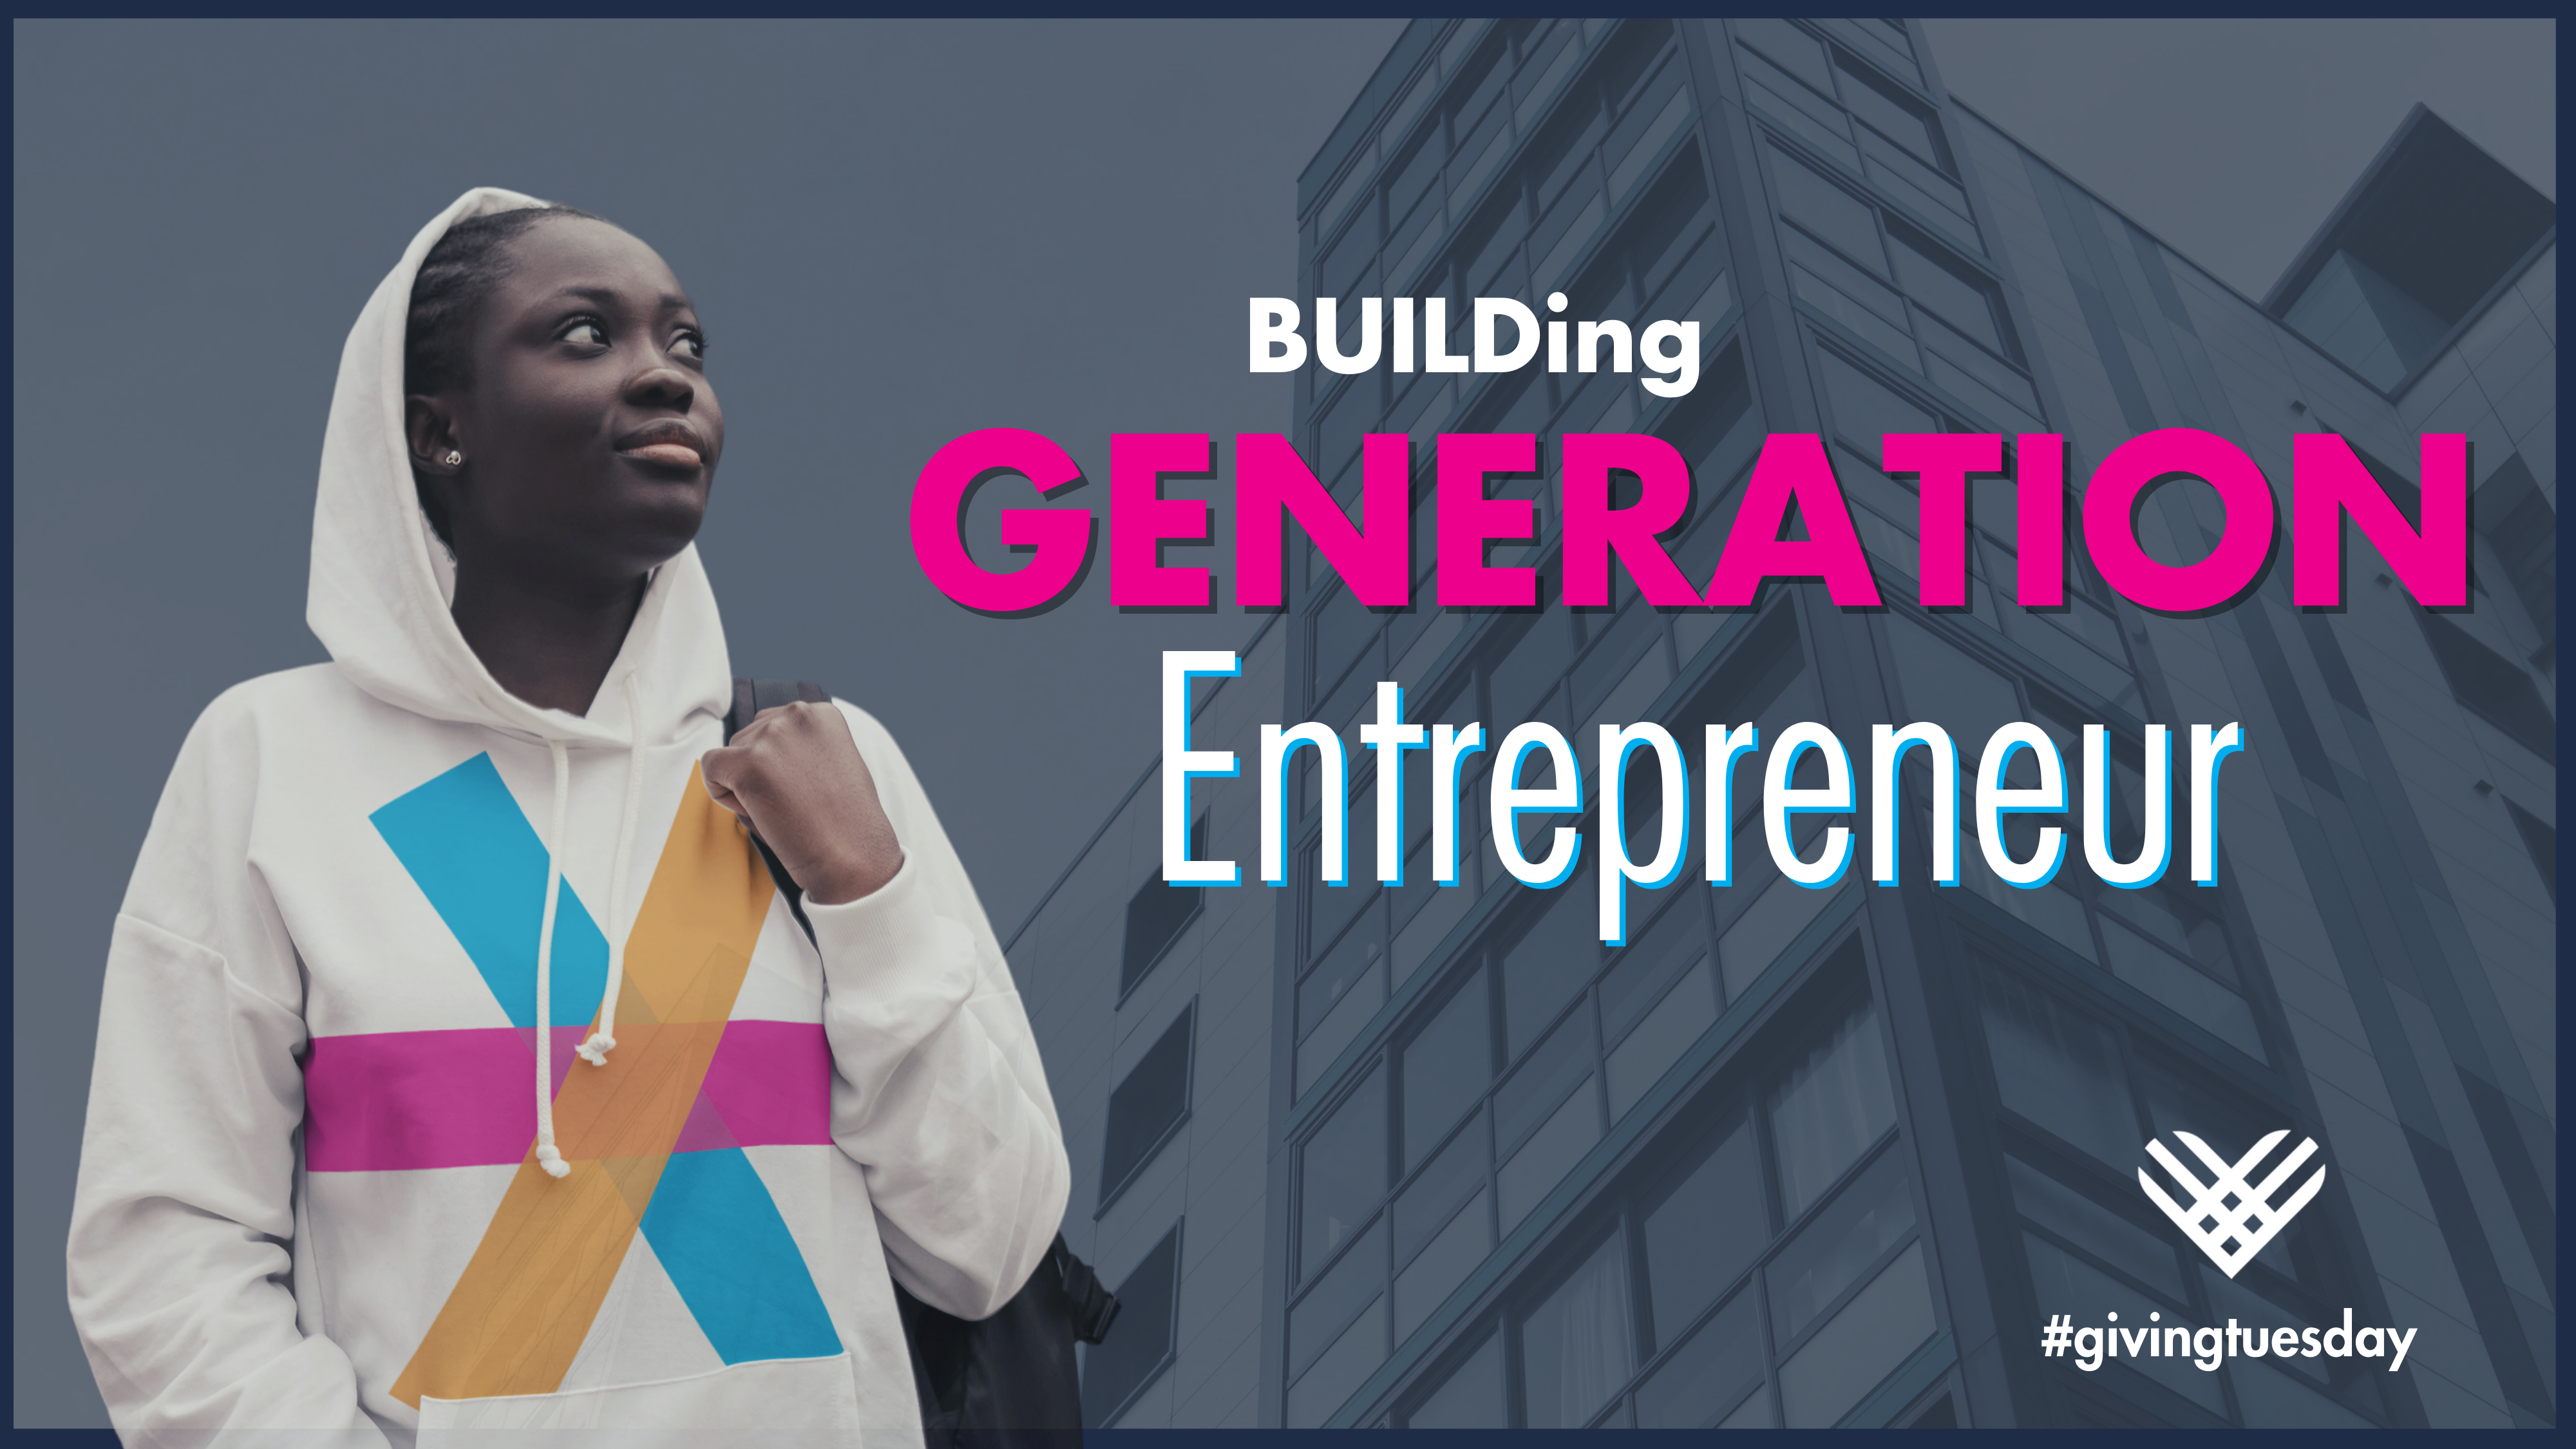 Meet the Fastest-Growing Demographic of Entrepreneurs!